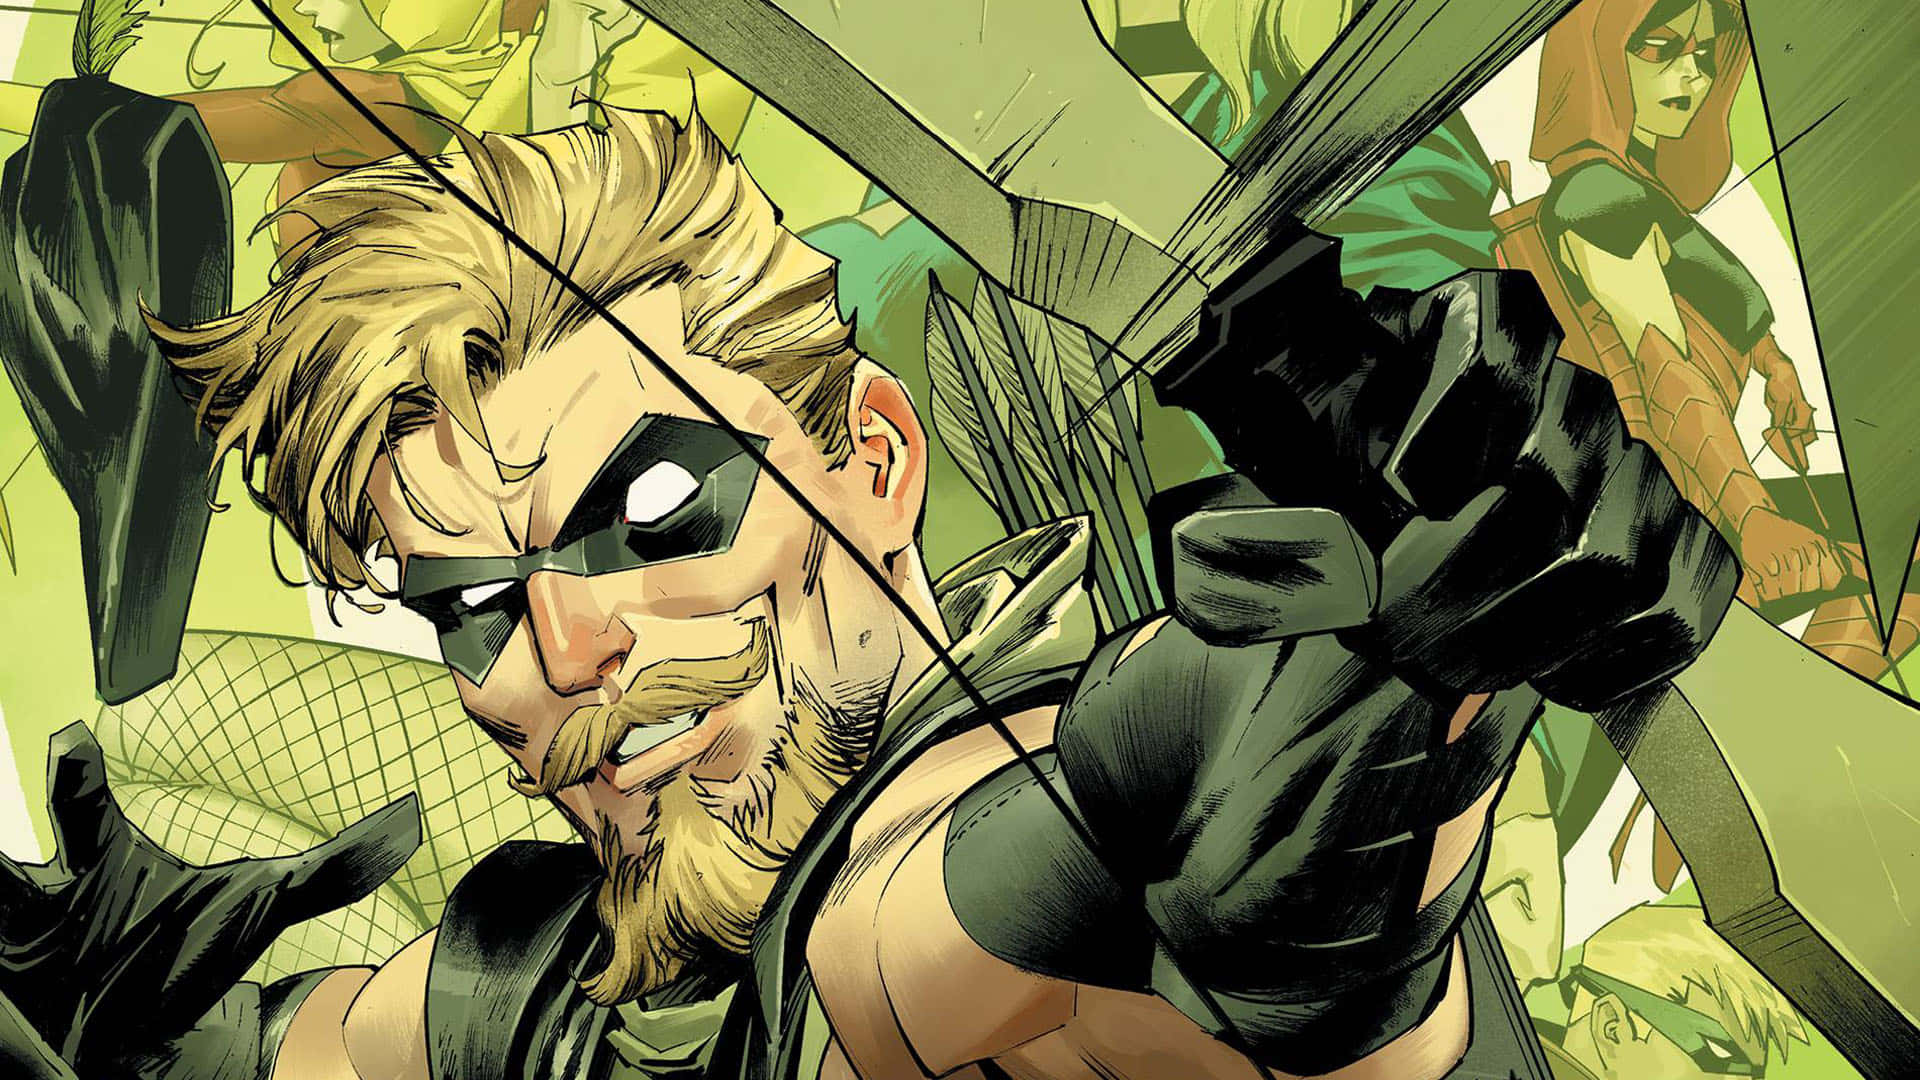 The Green Arrow refuses to back down